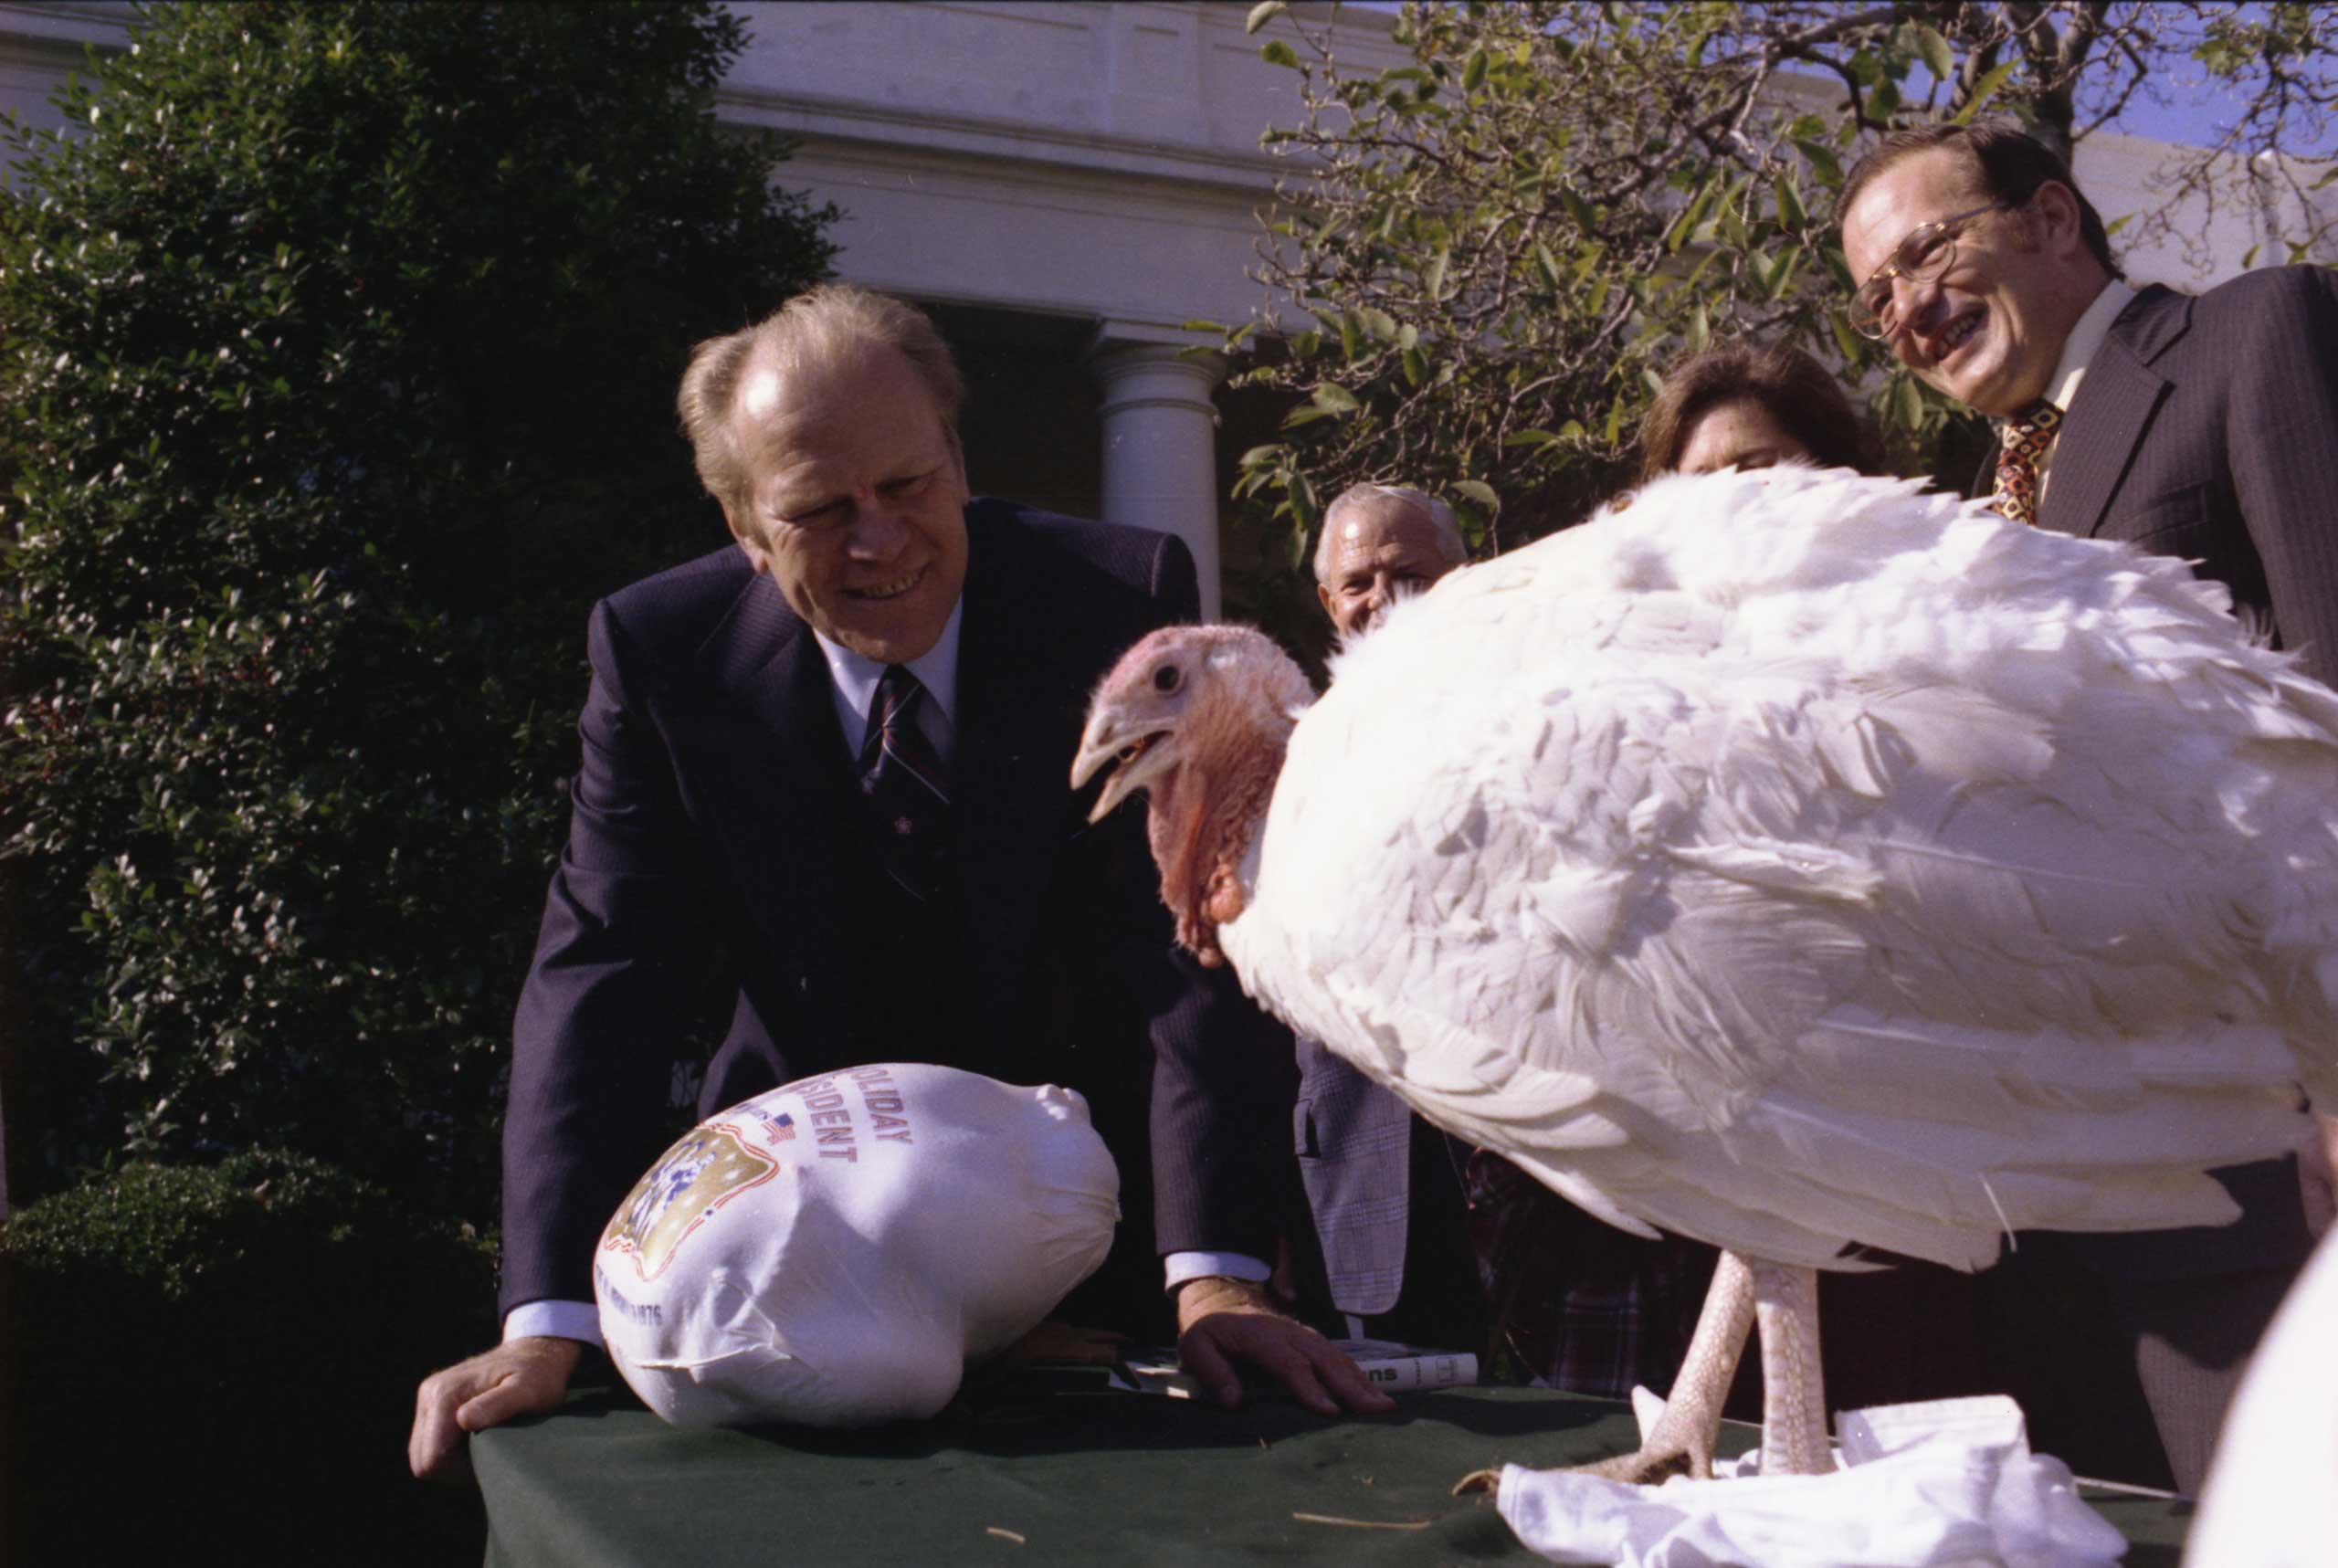 President Ford reprieves a Thanksgiving turkey presented by the National Turkey Federation on Nov. 20, 1975 in Washington D.C.